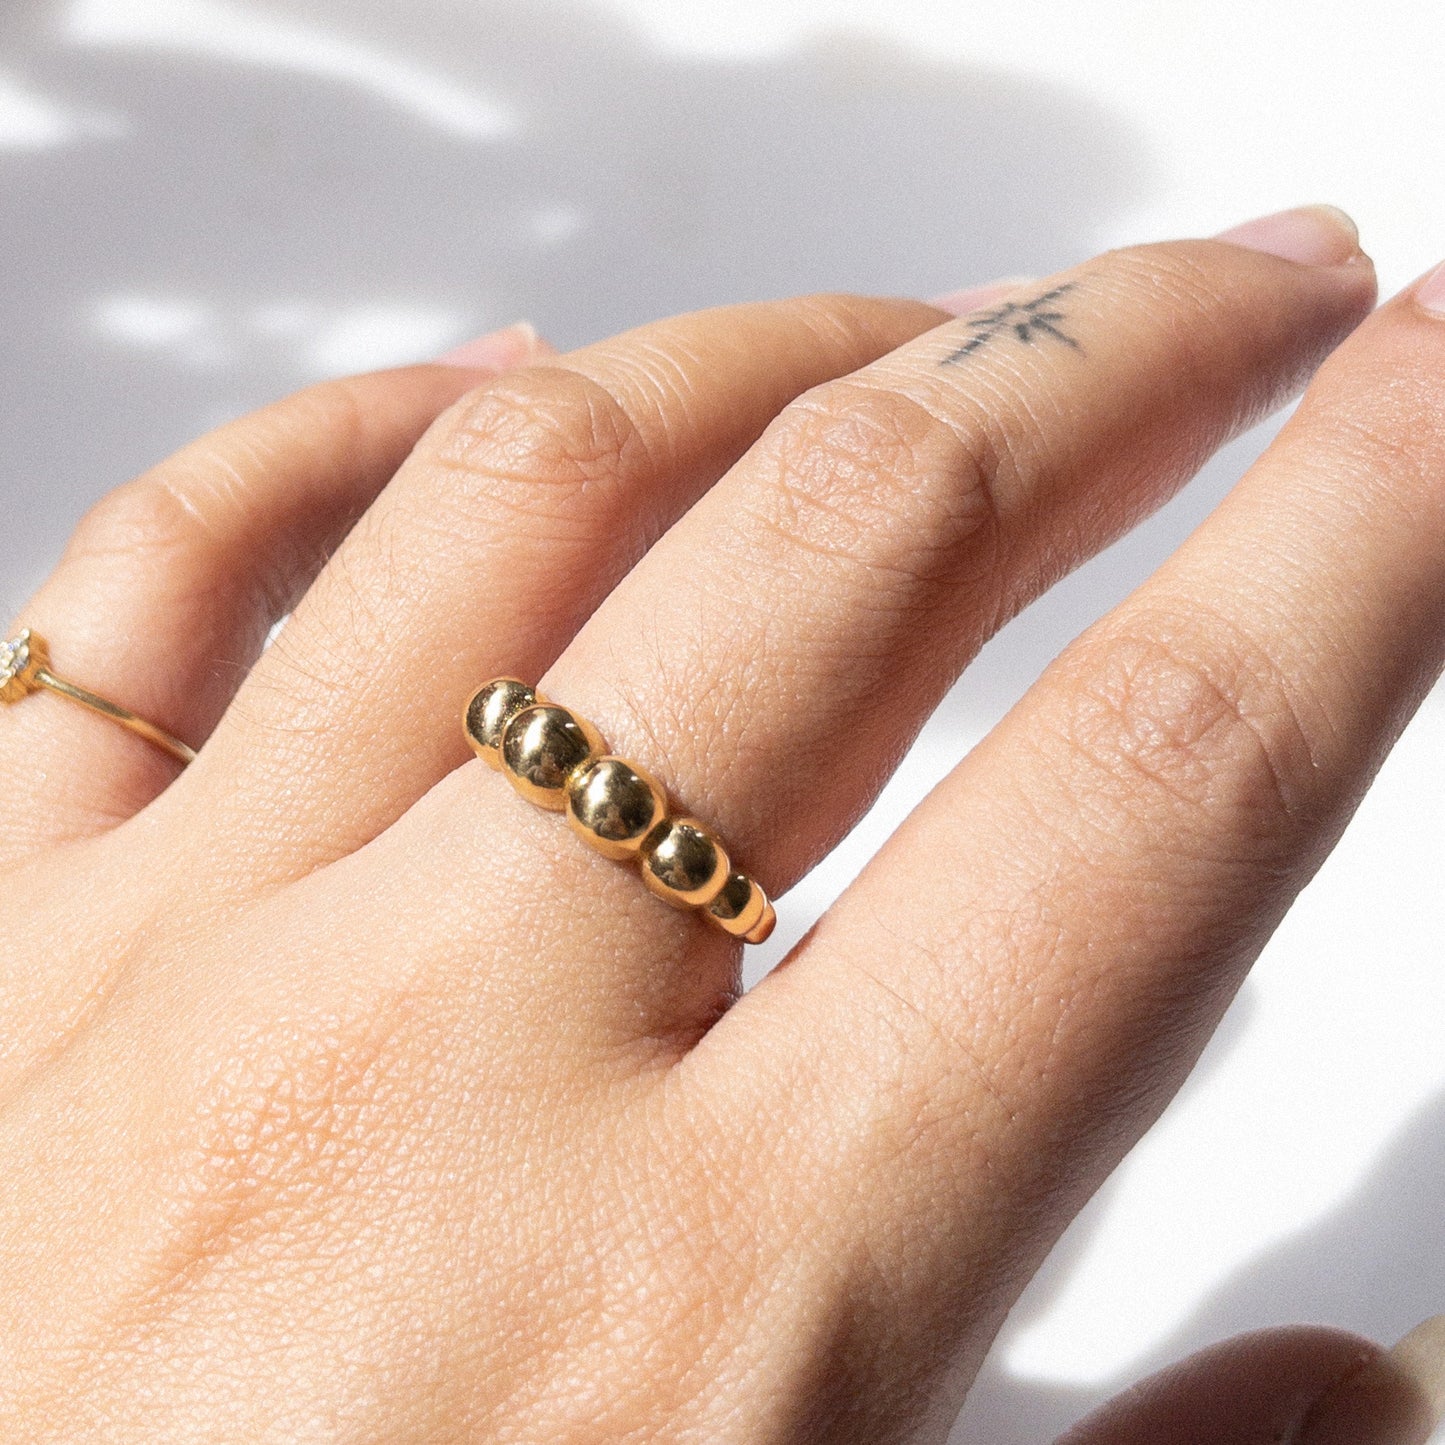 The Statement Poppy Ring in Solid Gold